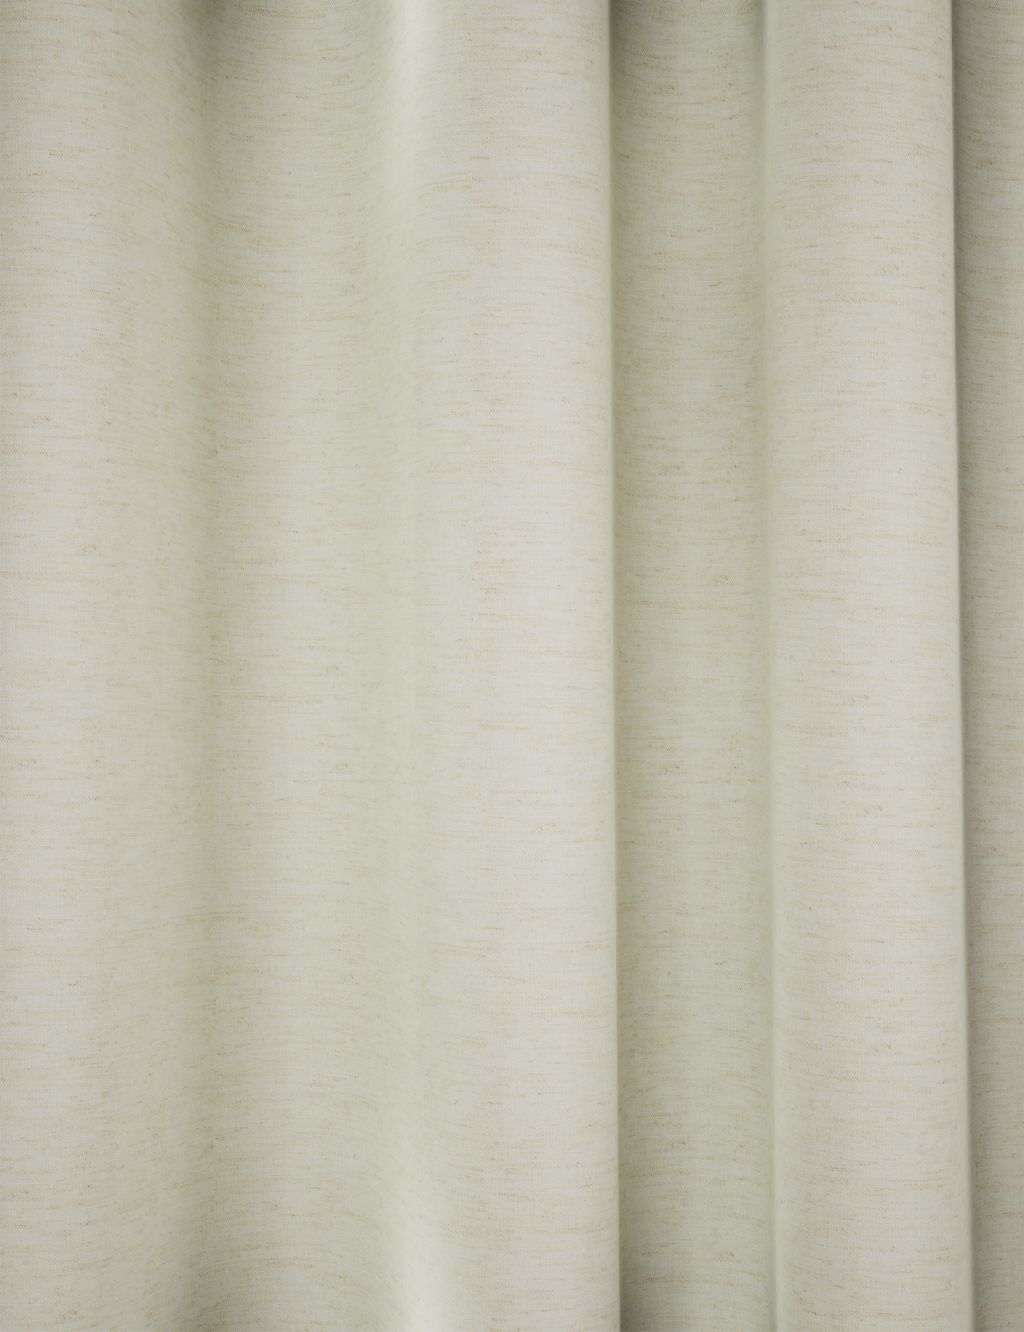 Linen Look Eyelet Blackout Curtains 1 of 6